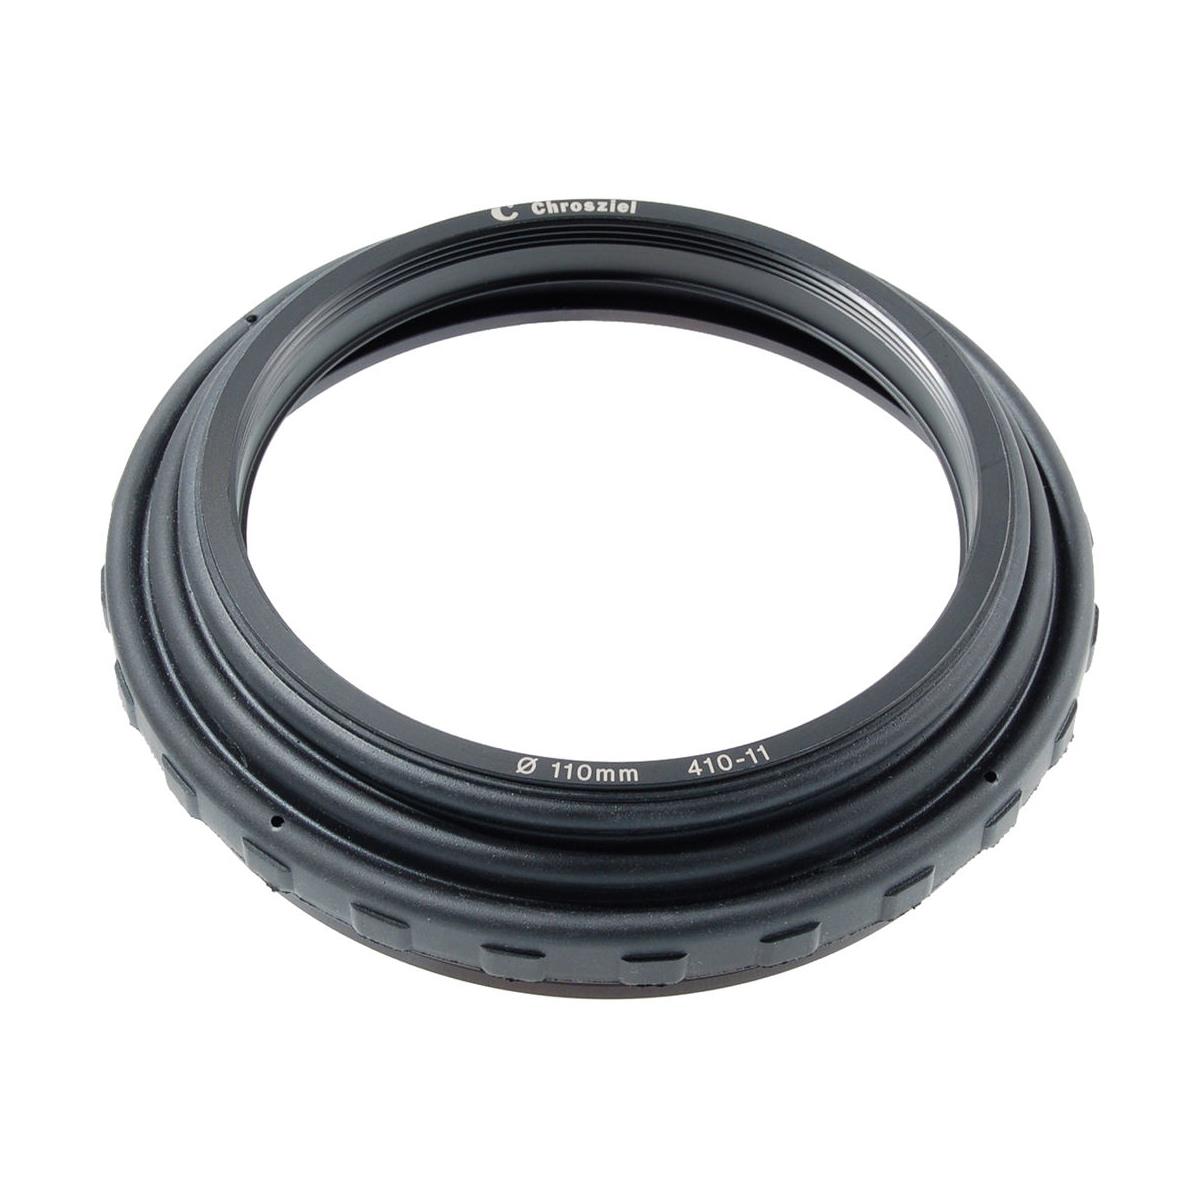 Image of Chrosziel 110mm Insert Ring for Rubber Bellows Retaining Ring